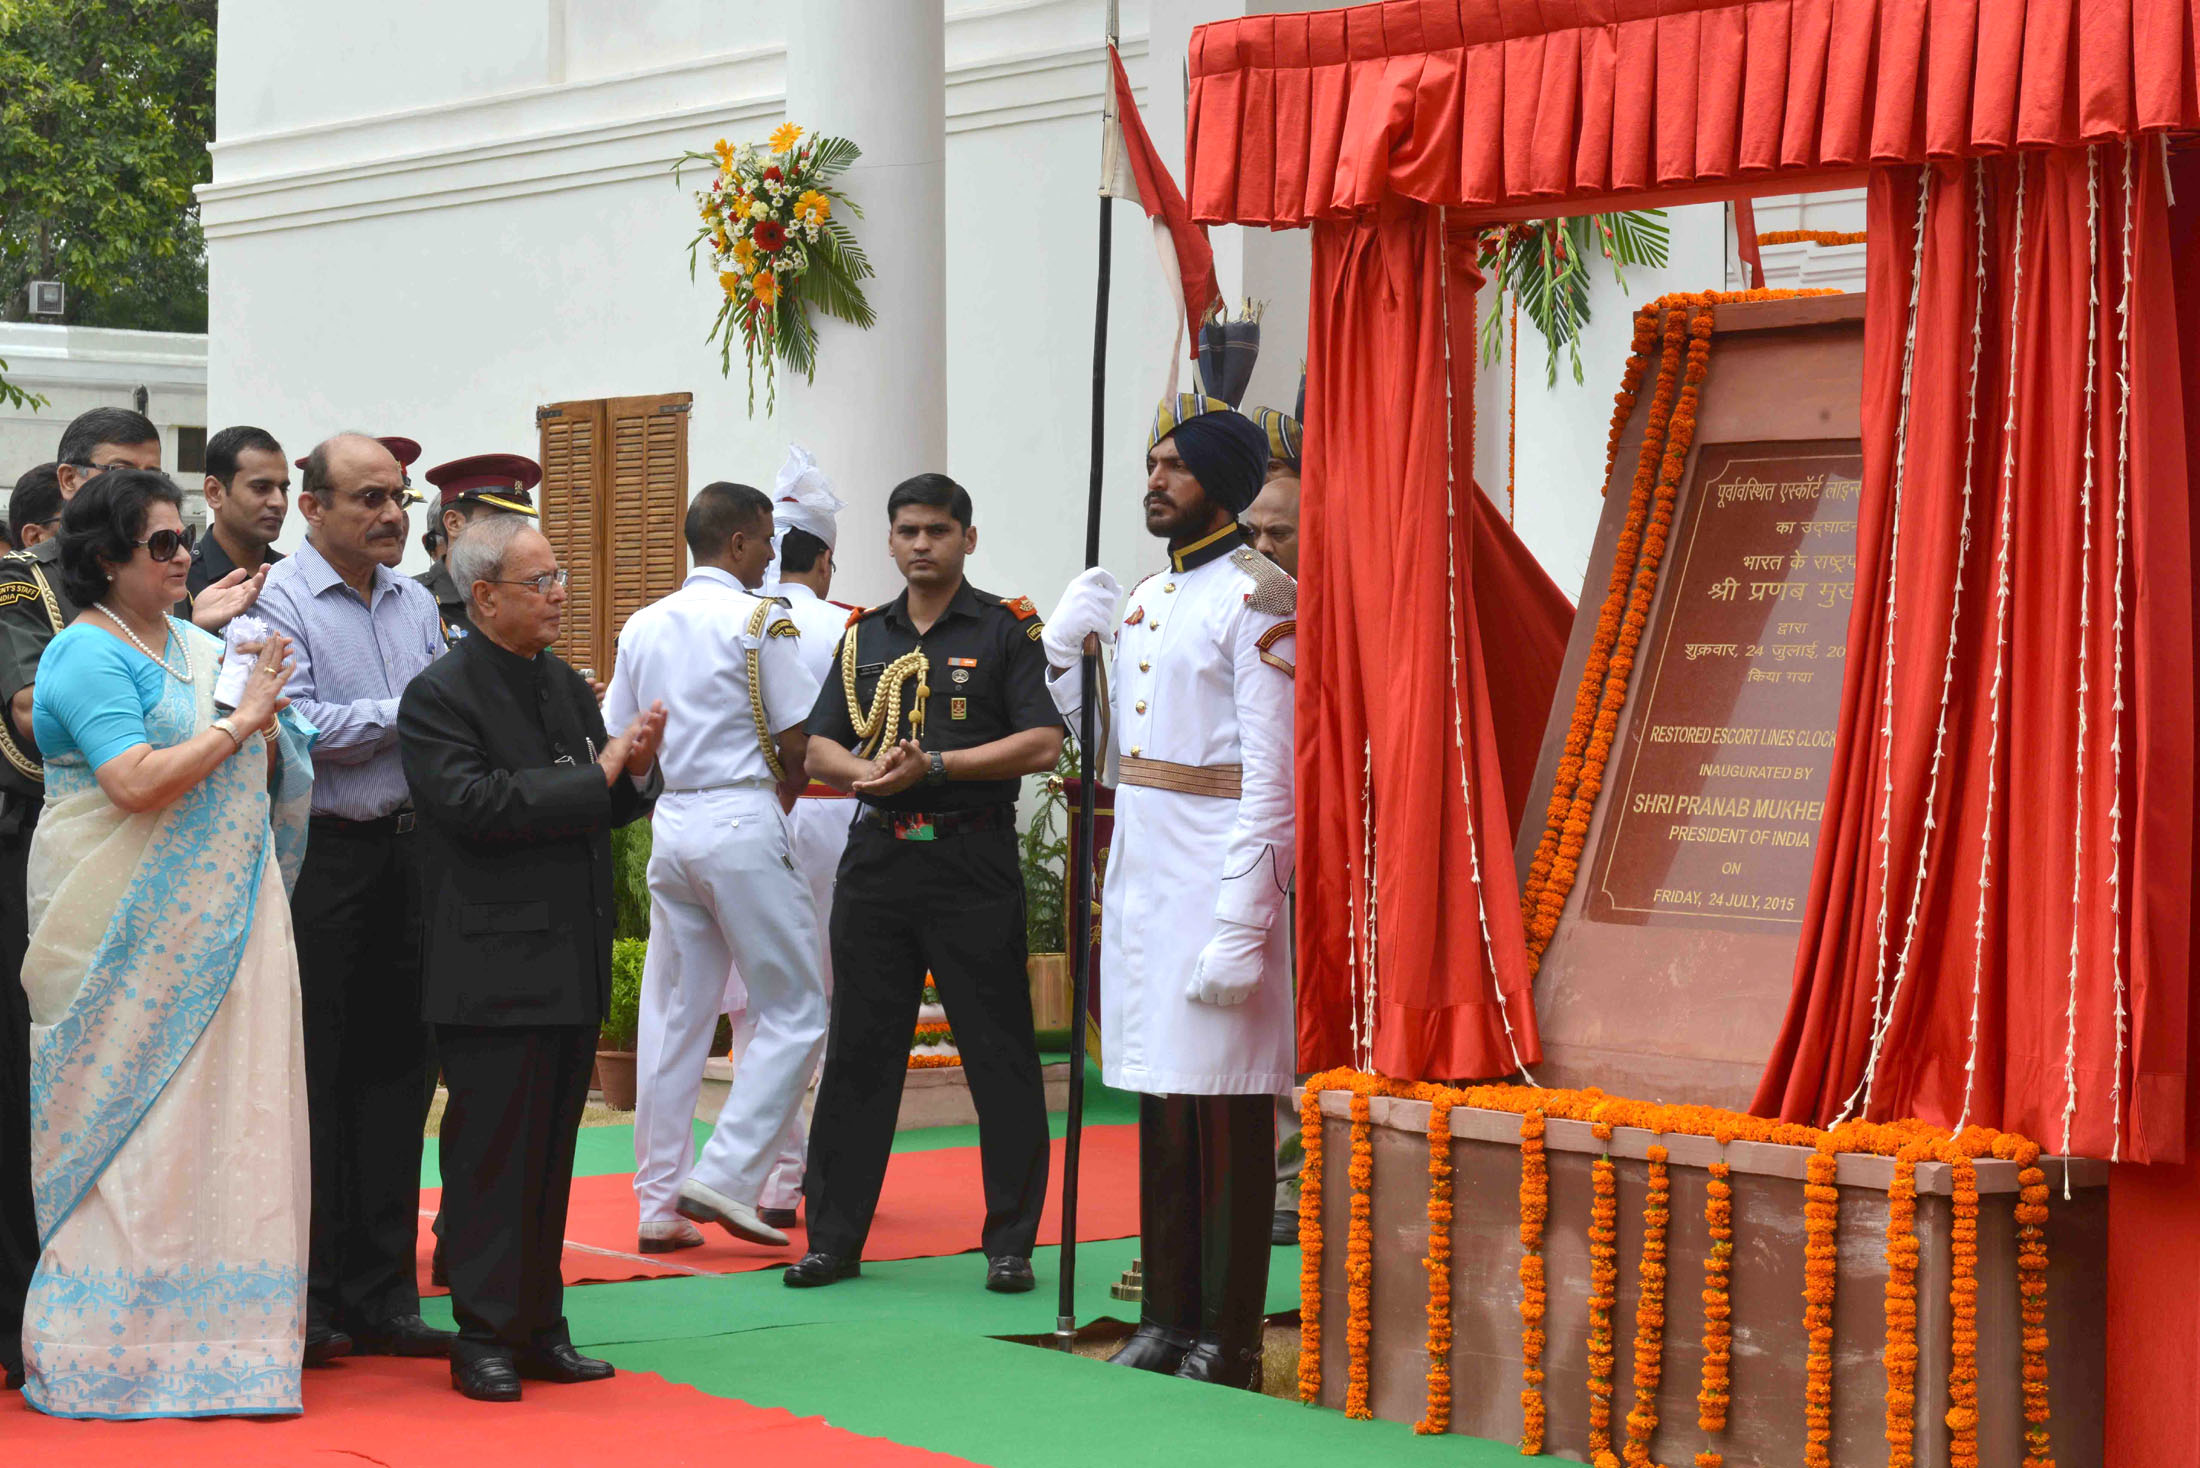 The President, Pranab Mukherjee inaugurating the Restored Schedule ‘A’ Clock Tower, at Schedule ‘A’, President’s Estate, in New Delhi on July 24, 2015.